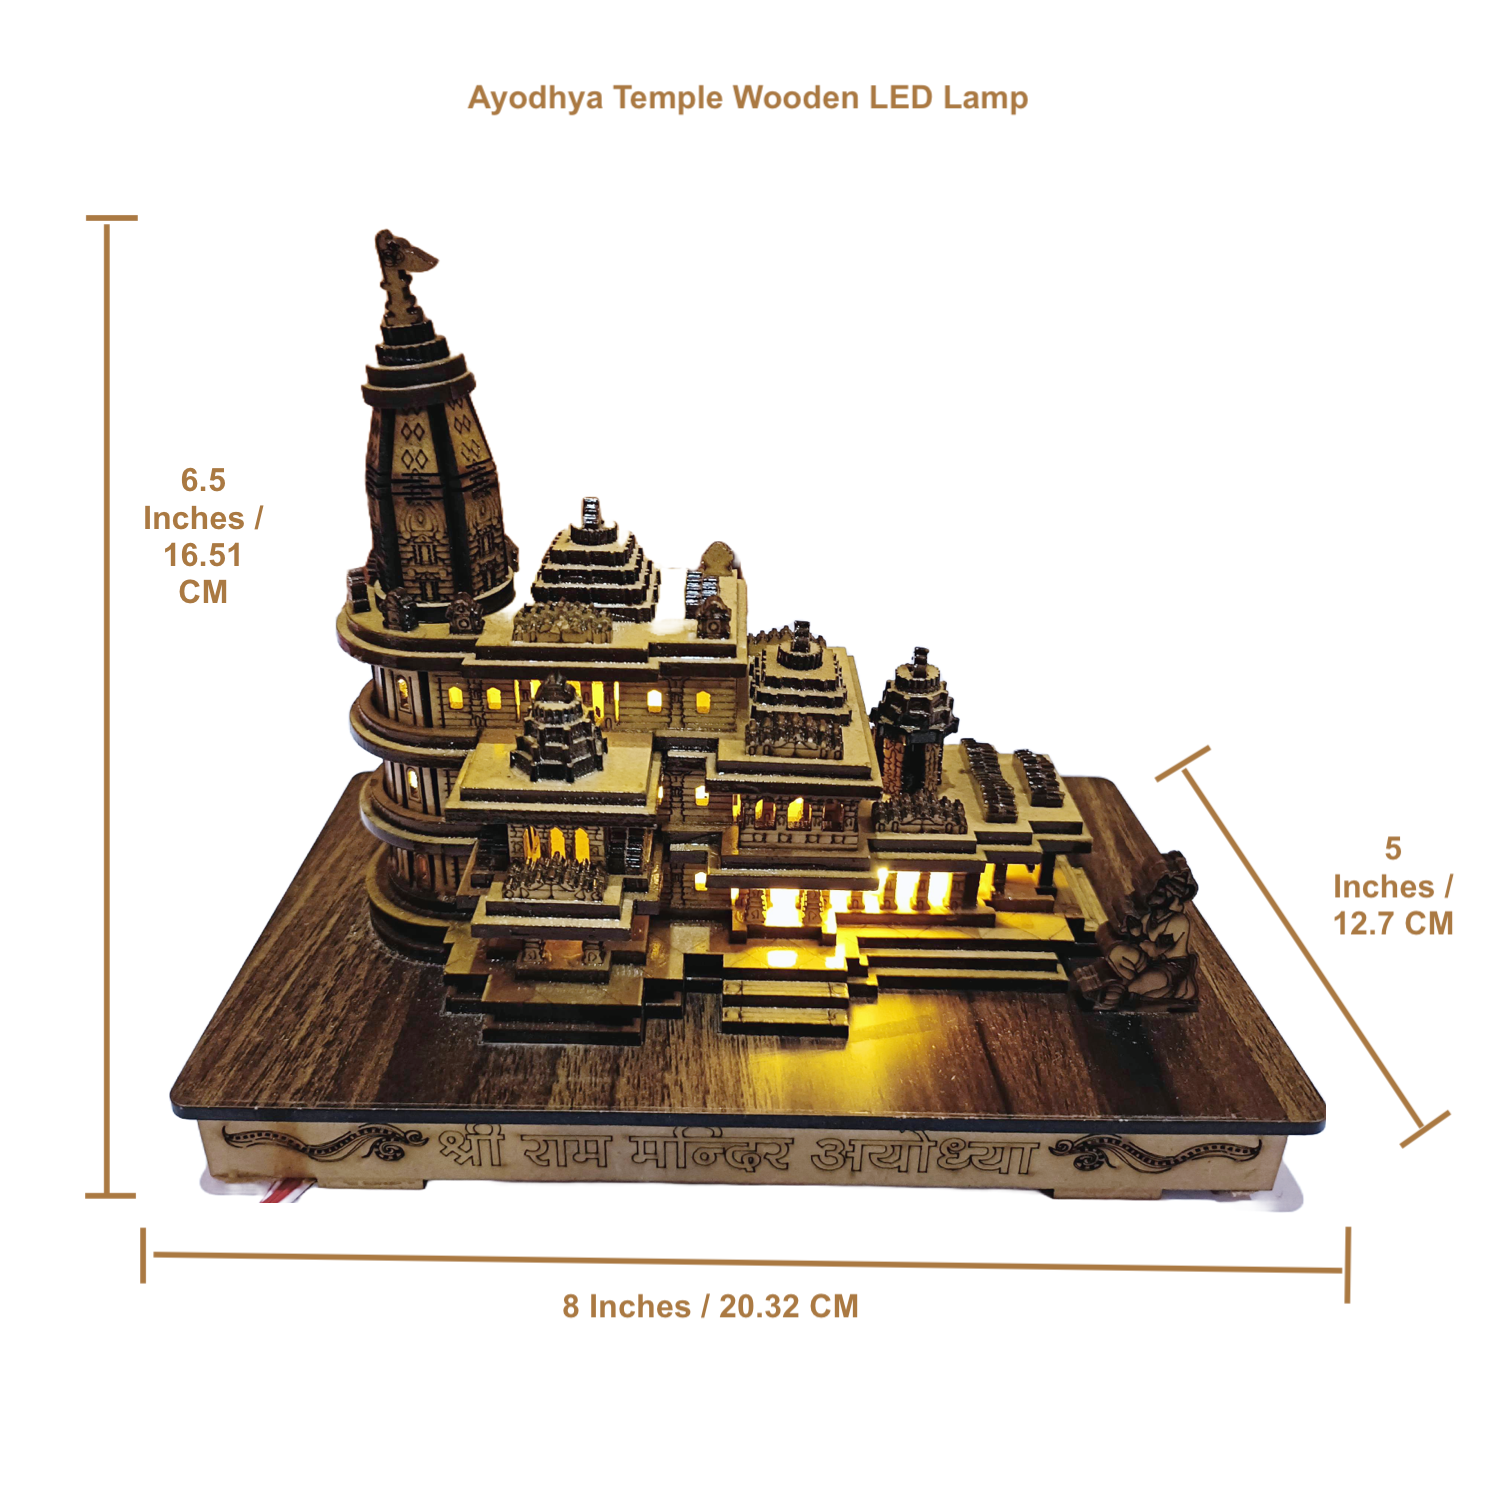 Statue ALiLA Shri Ram 3D Wooden Mandir Ayodhya Model with LED Lights for Home Temple Pooja Decor Decoration Gifts, 8 Inch Length / 6.5 Inch Height Statue